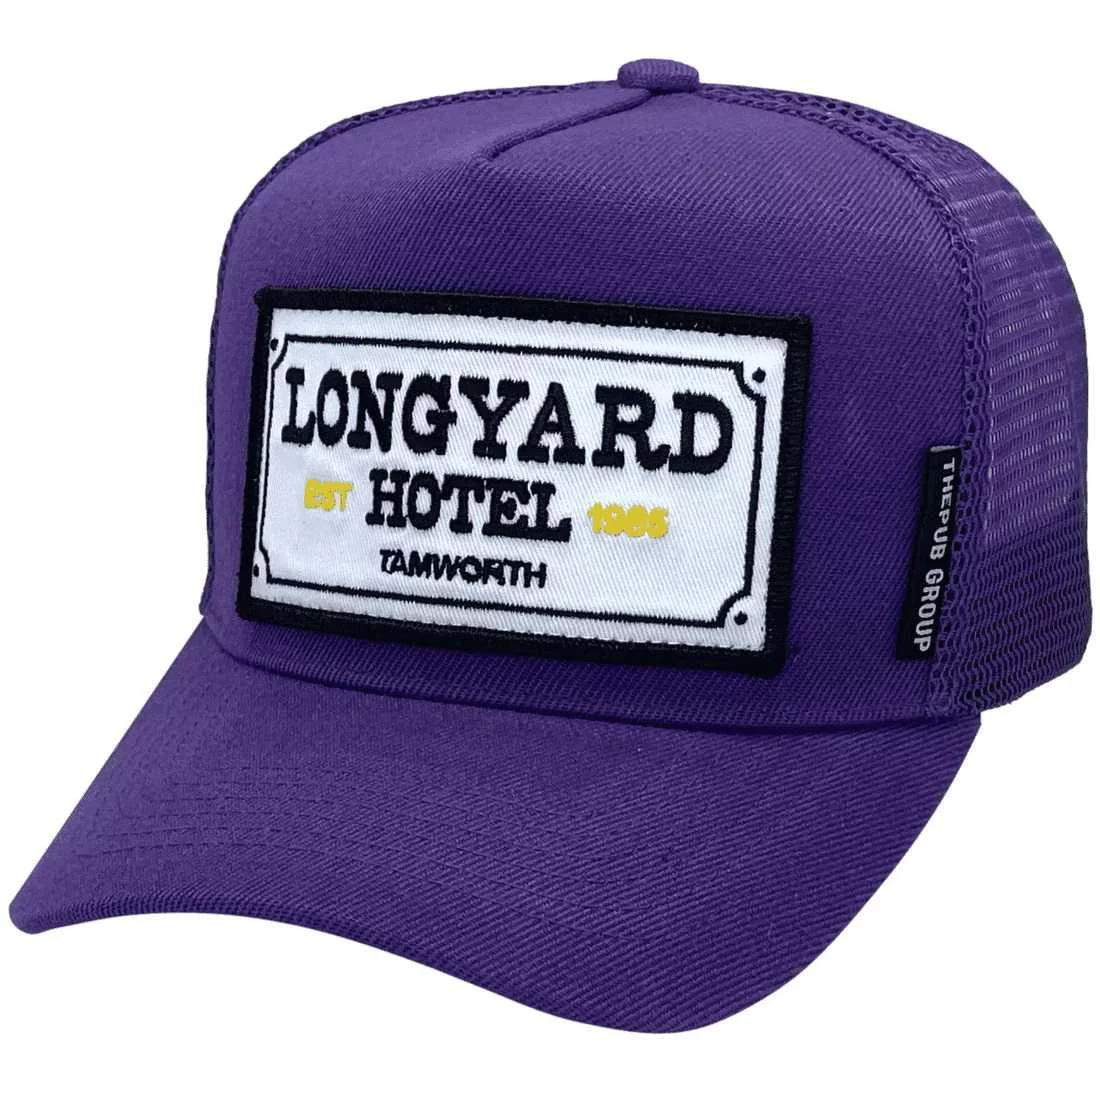 Longyard Hotel Tamworth NSW HP Original Basic Aussie Trucker Hat with optional NO sidebands Exclusive Australian Head Fit & sew-on embroidered badge with merrill edge Purple